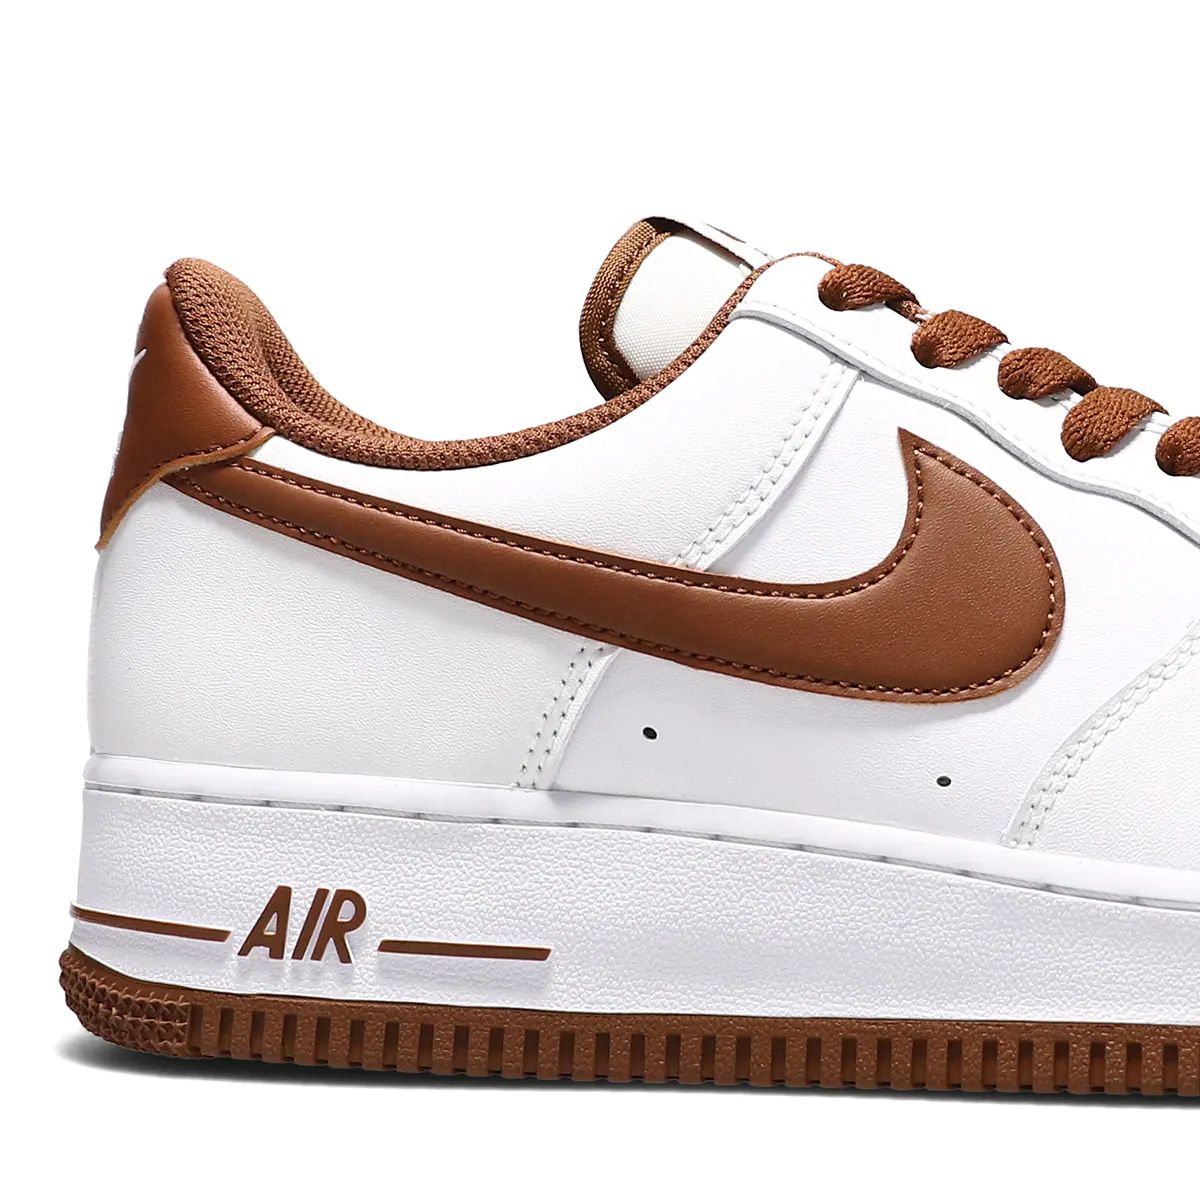 New Looks // Nike Air Force 1 Low “Pecan” | House of Heat°